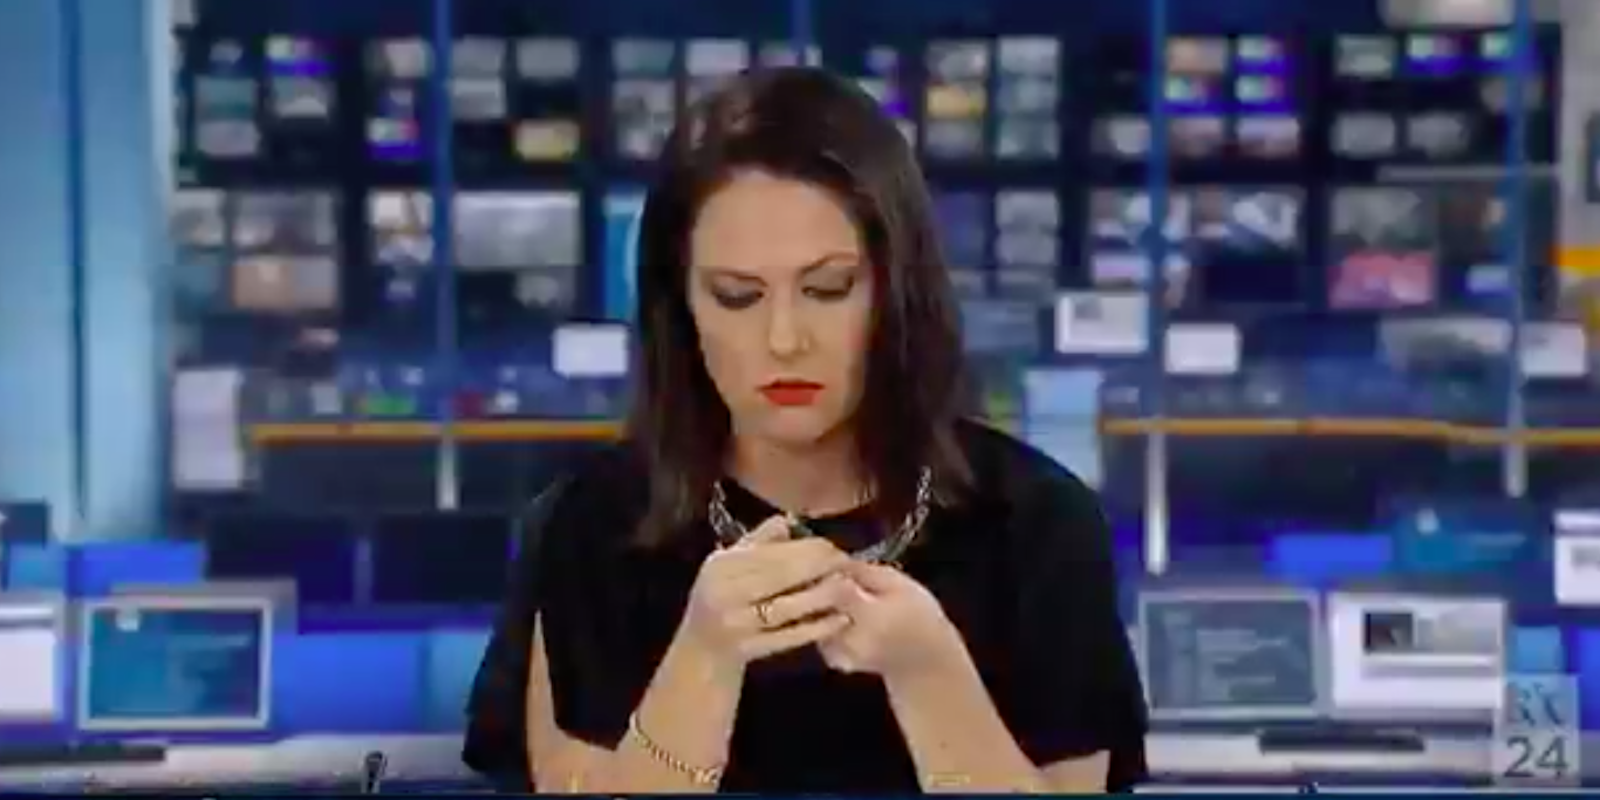 newscaster daydream on live television: picture of newscaster staring at her pen